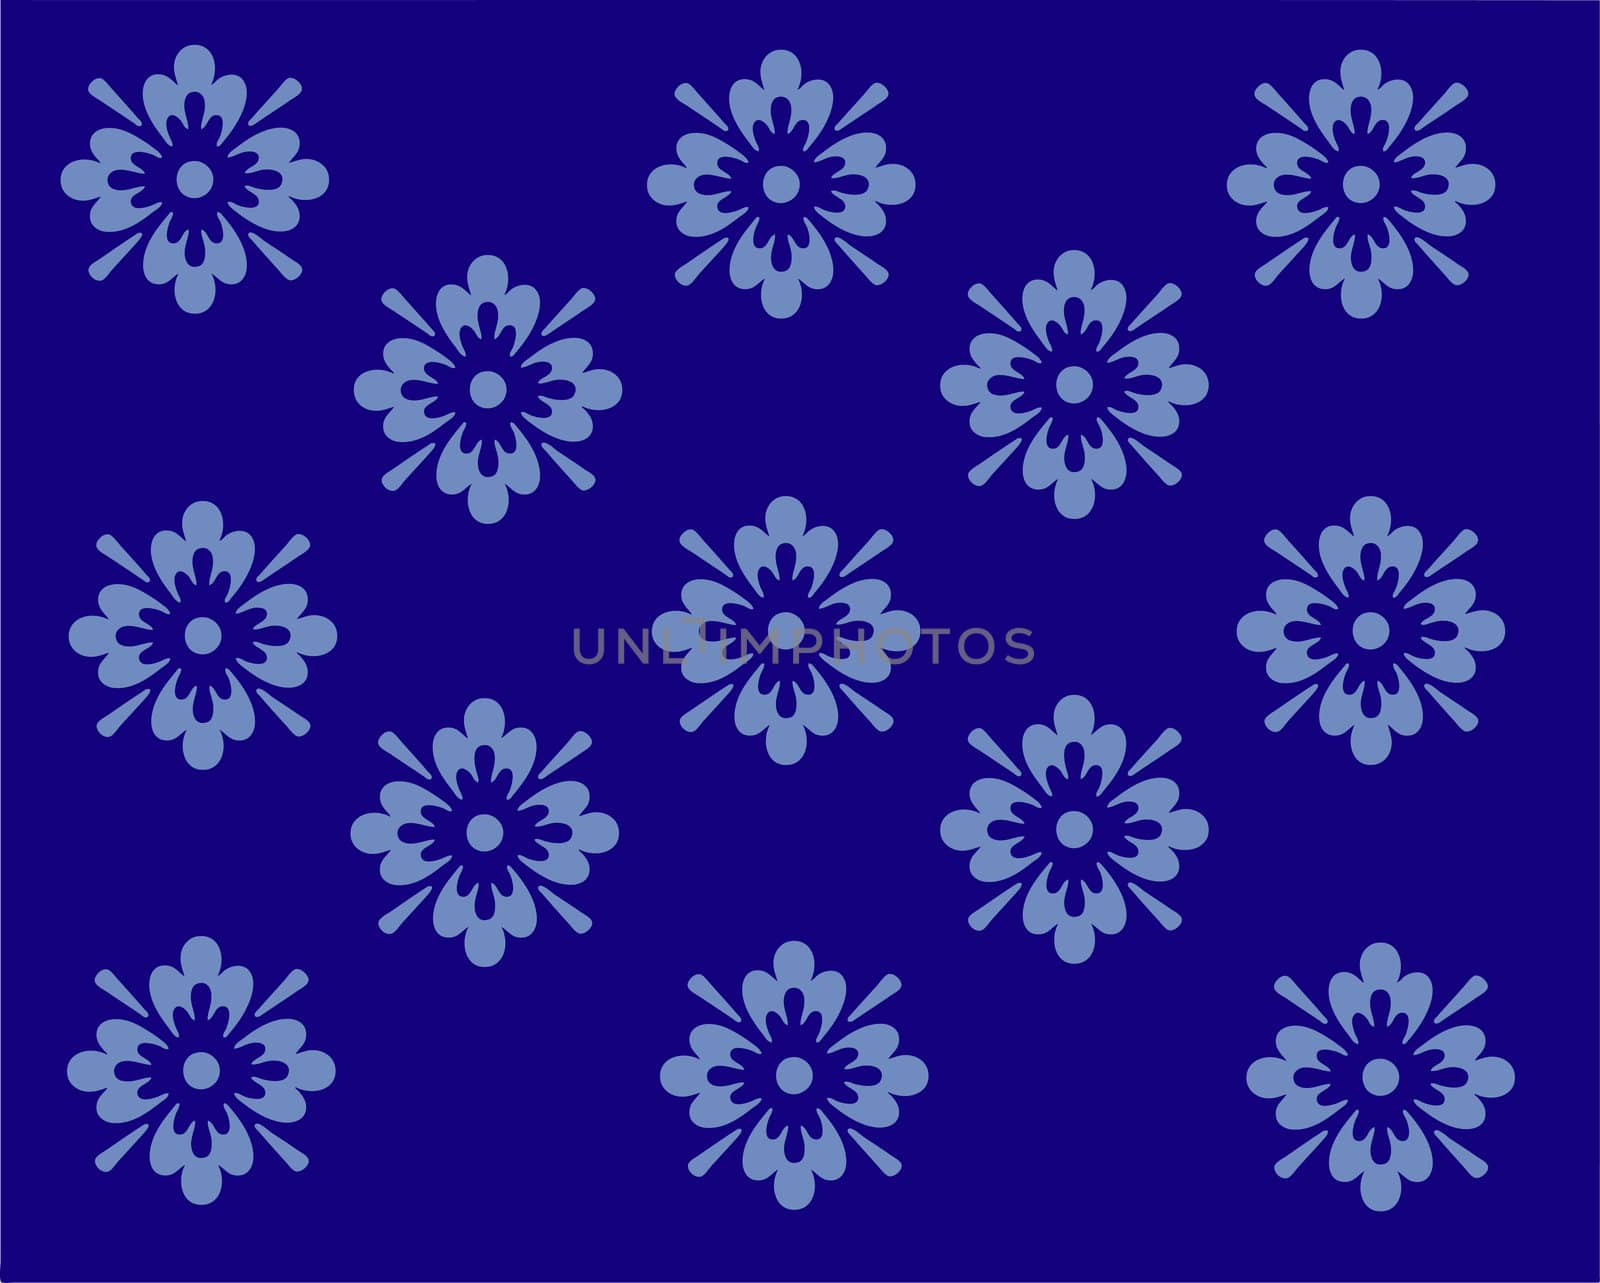 illustration of a wallpaper design in blue by peromarketing